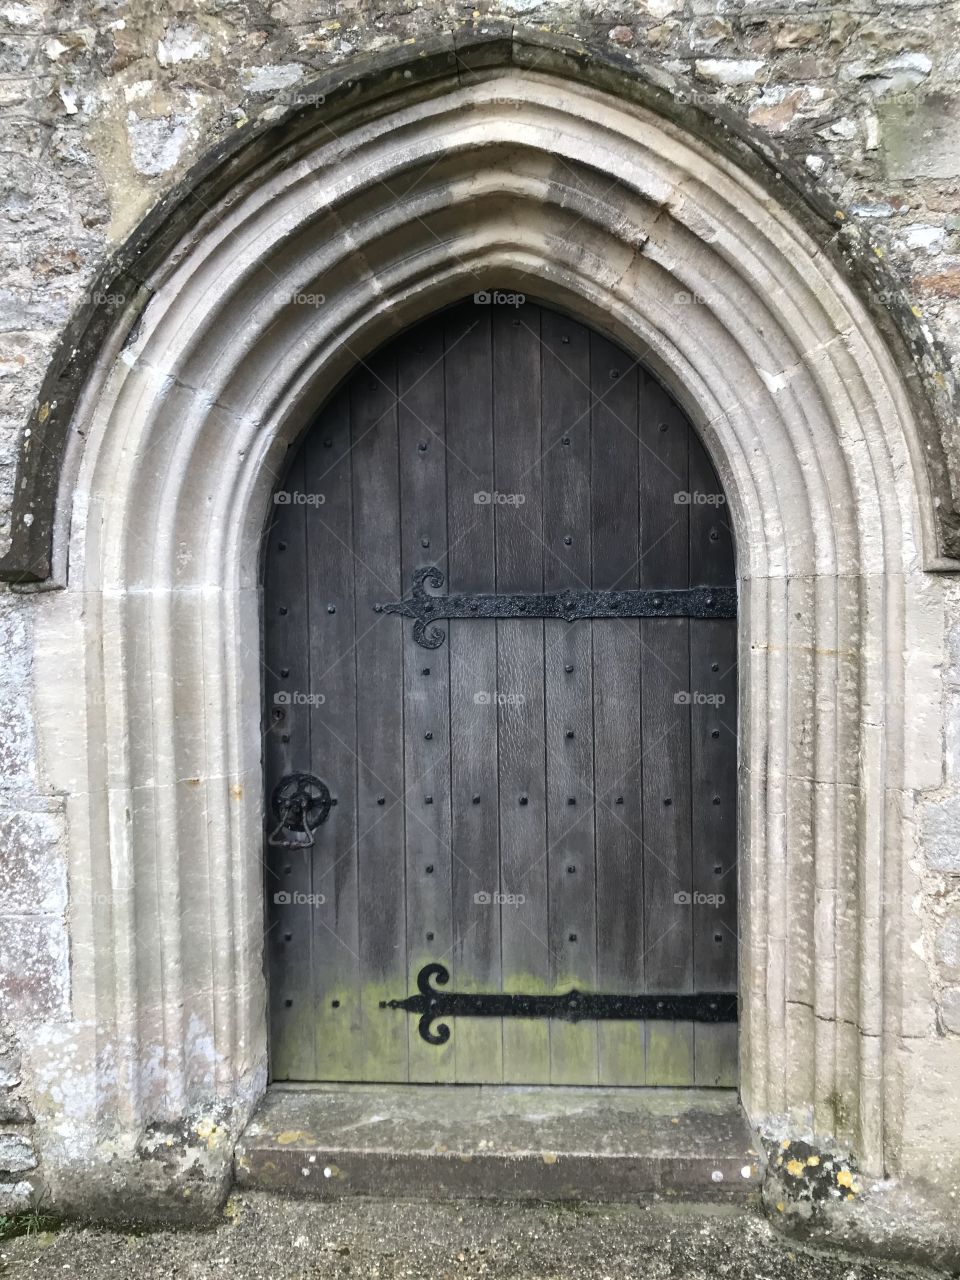 Traditional photo of this elegant church door, steeped in history both inside and out.